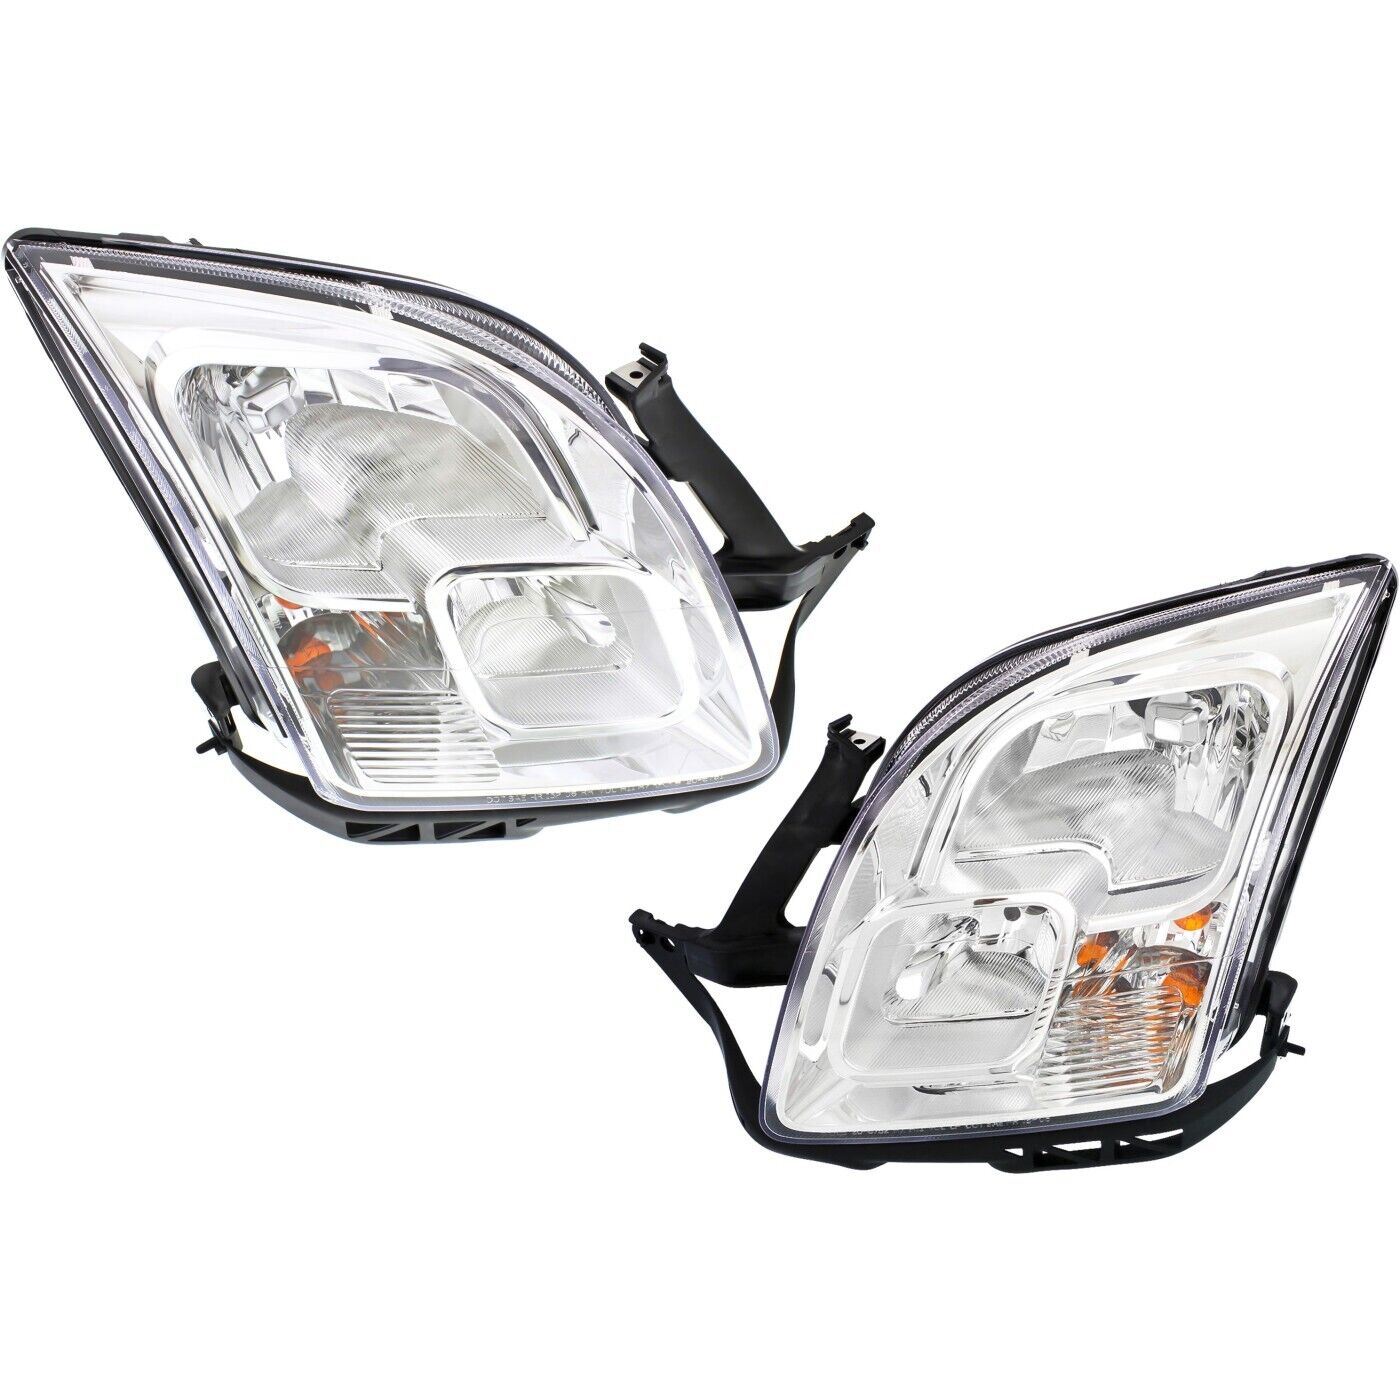 Headlight Set For 2006 2007 2008 2009 Ford Fusion Left and Right With Bulb 2Pc